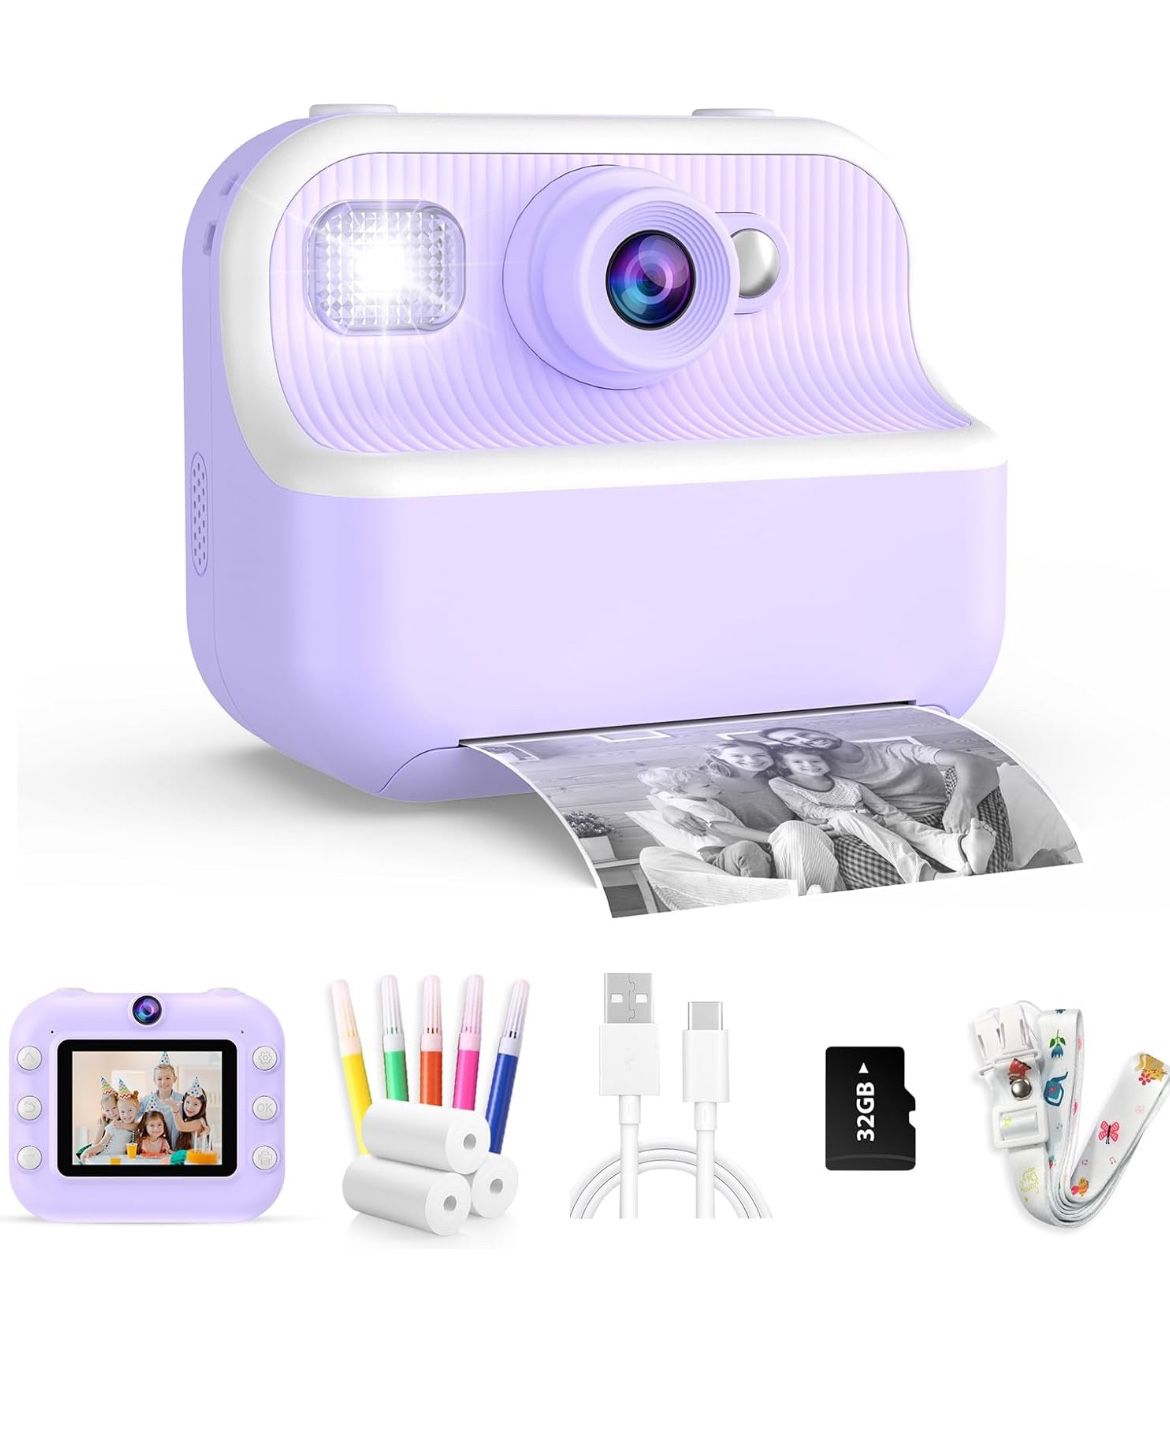  Camera for Kids Instant Print Photos - Toys Cameras for Toddler Printing Pictures- 12Mp Children Digital Selfie Camera - 1080P Video Cam